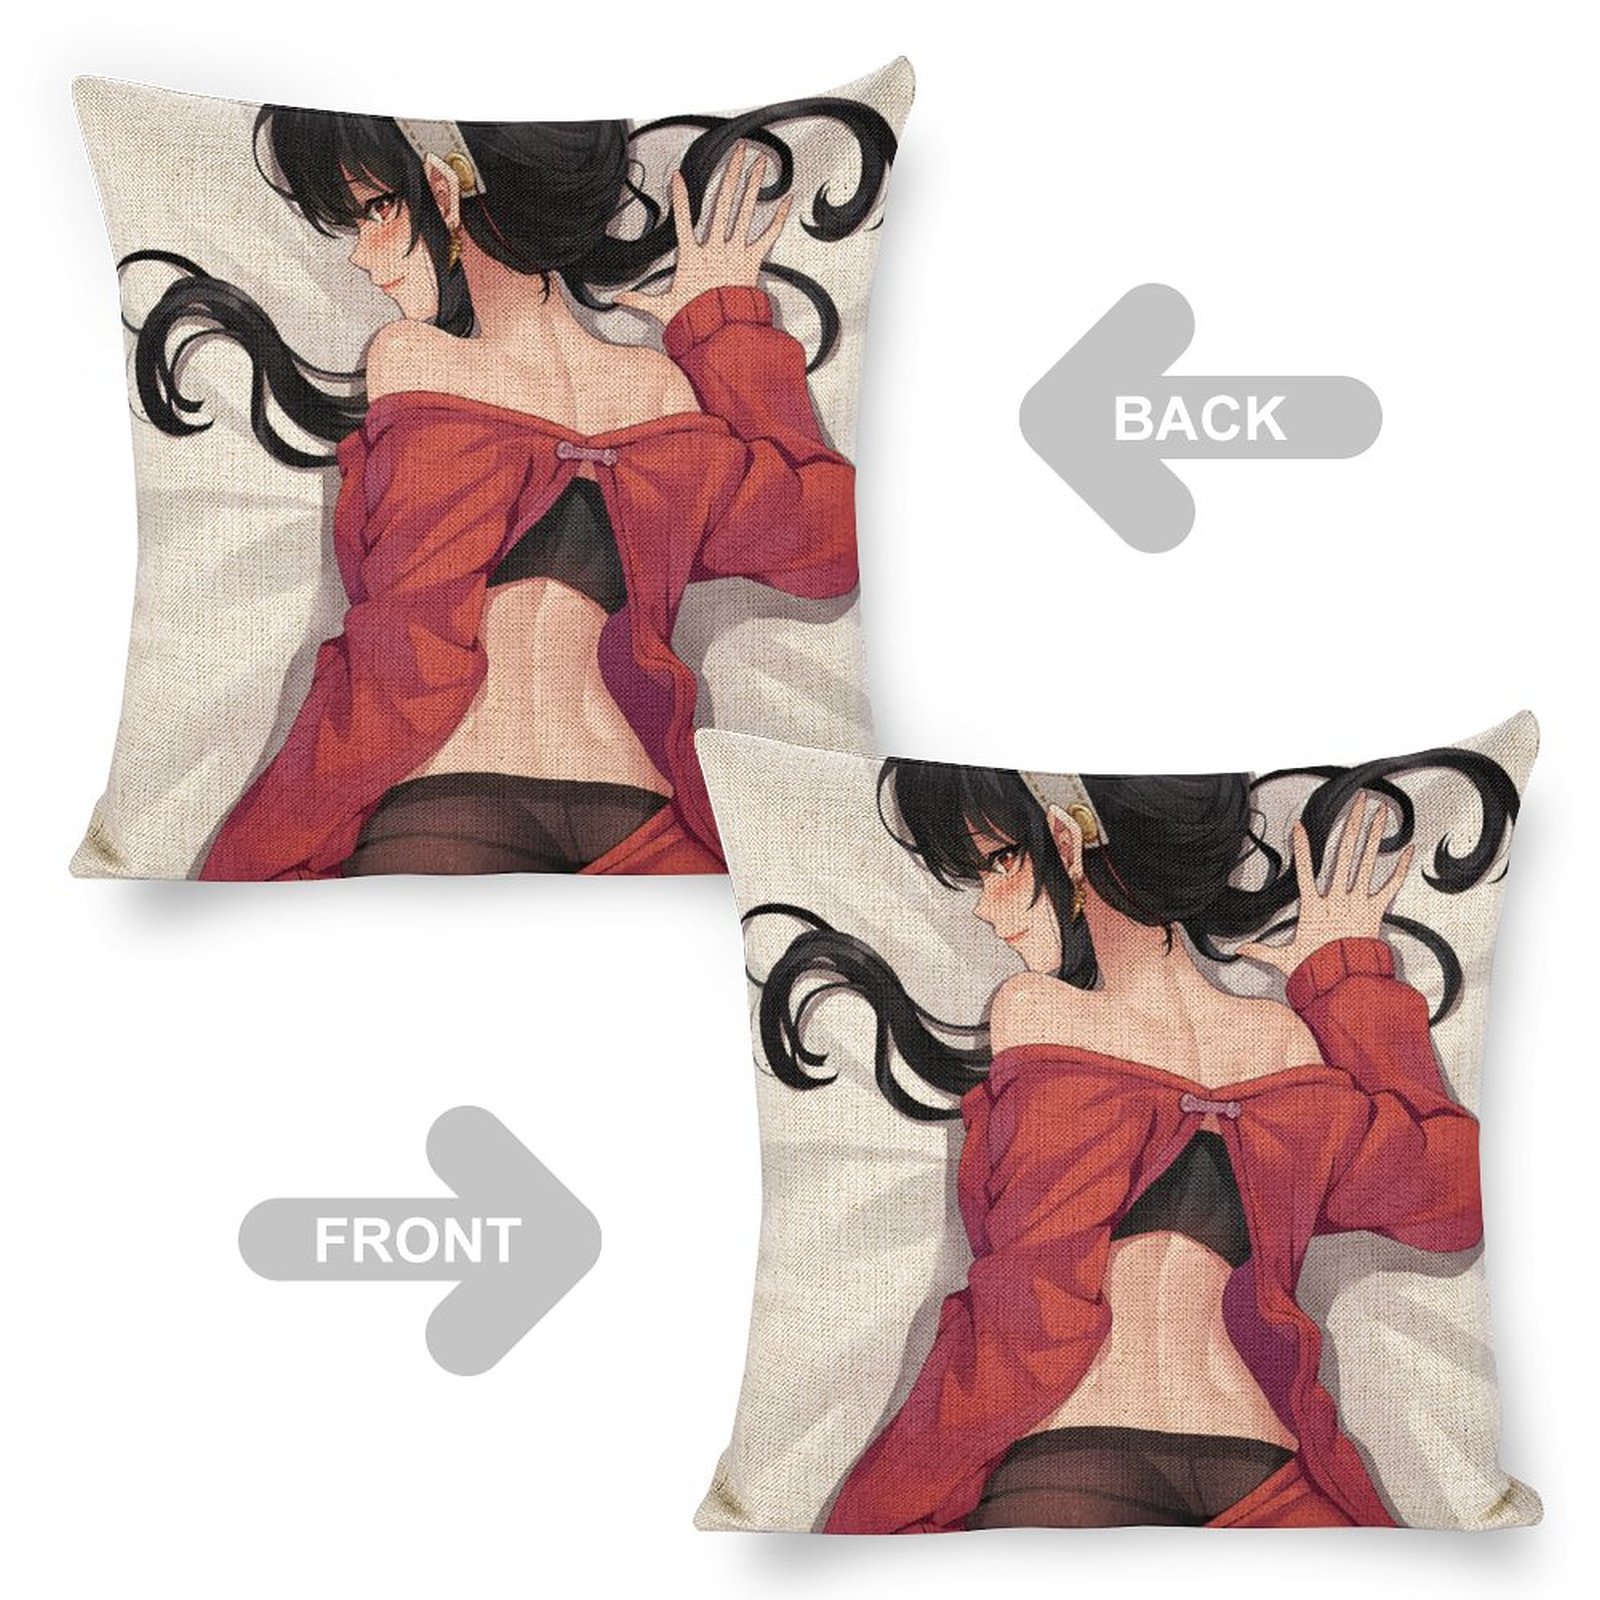 Spy x Family Thorn Princess Yor Forger Breathable Linen Square Throw Cushion Cover 18x18in(45x45cm)